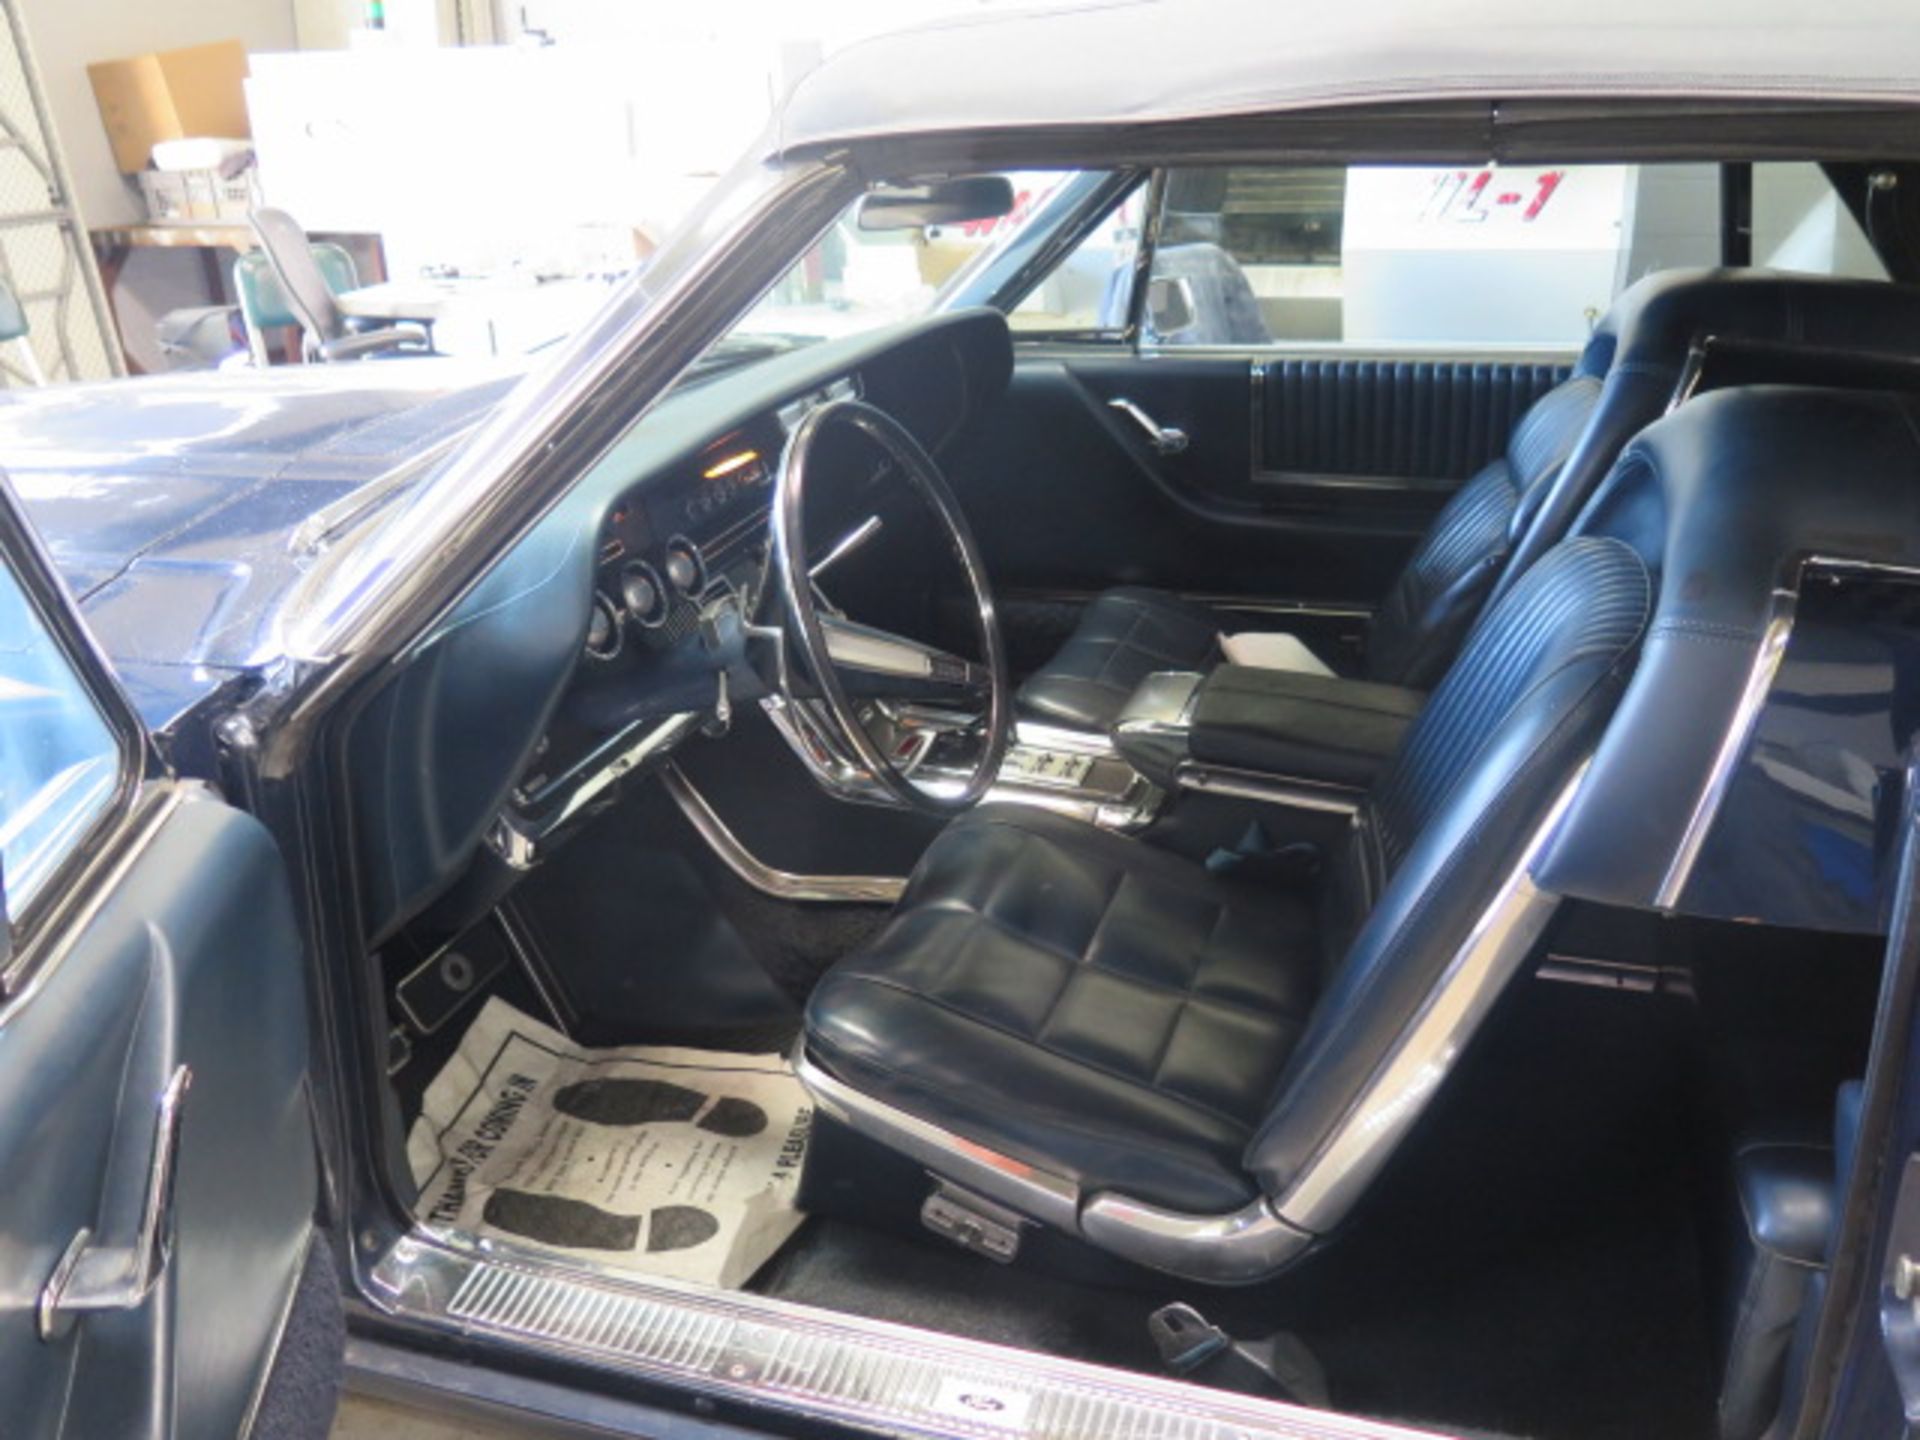 1966 Ford Thunderbird Convertible, Rare Q Code 428 w/ 3x2 Carburetors. (SOLD AS-IS - NO WARRANTY) - Image 44 of 45